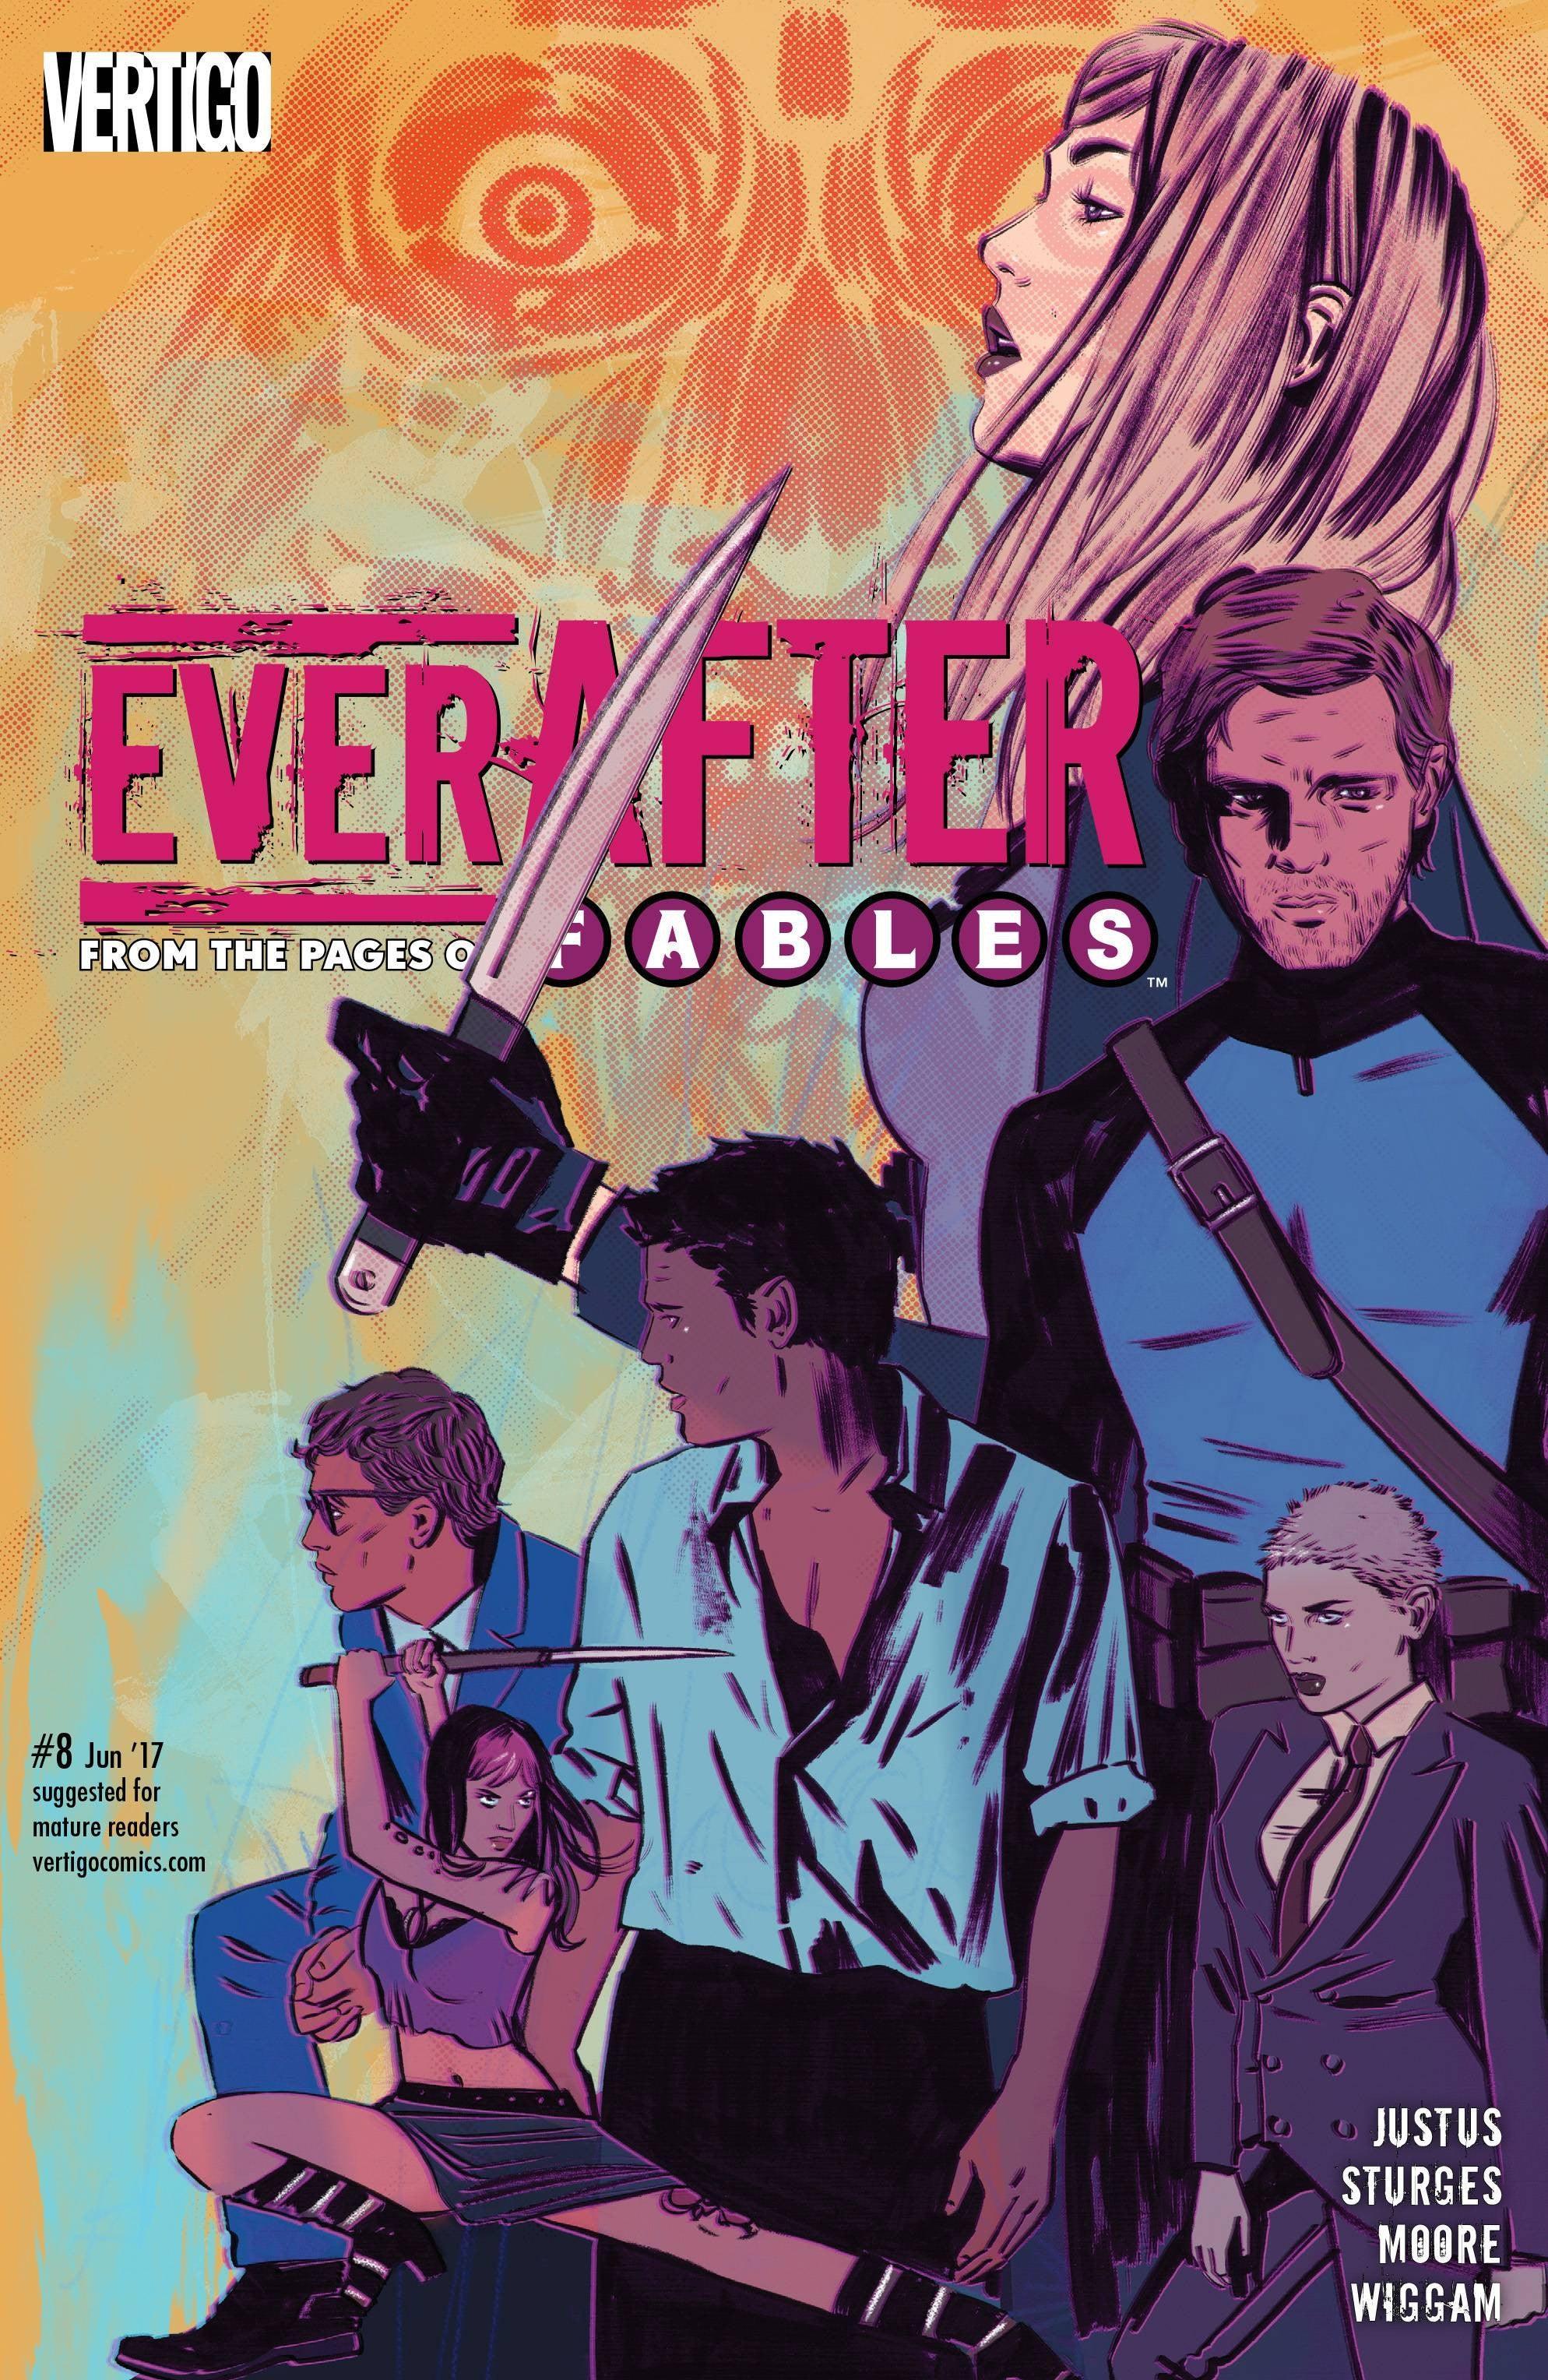 EVERAFTER FROM THE PAGES OF FABLES #8 - Kings Comics